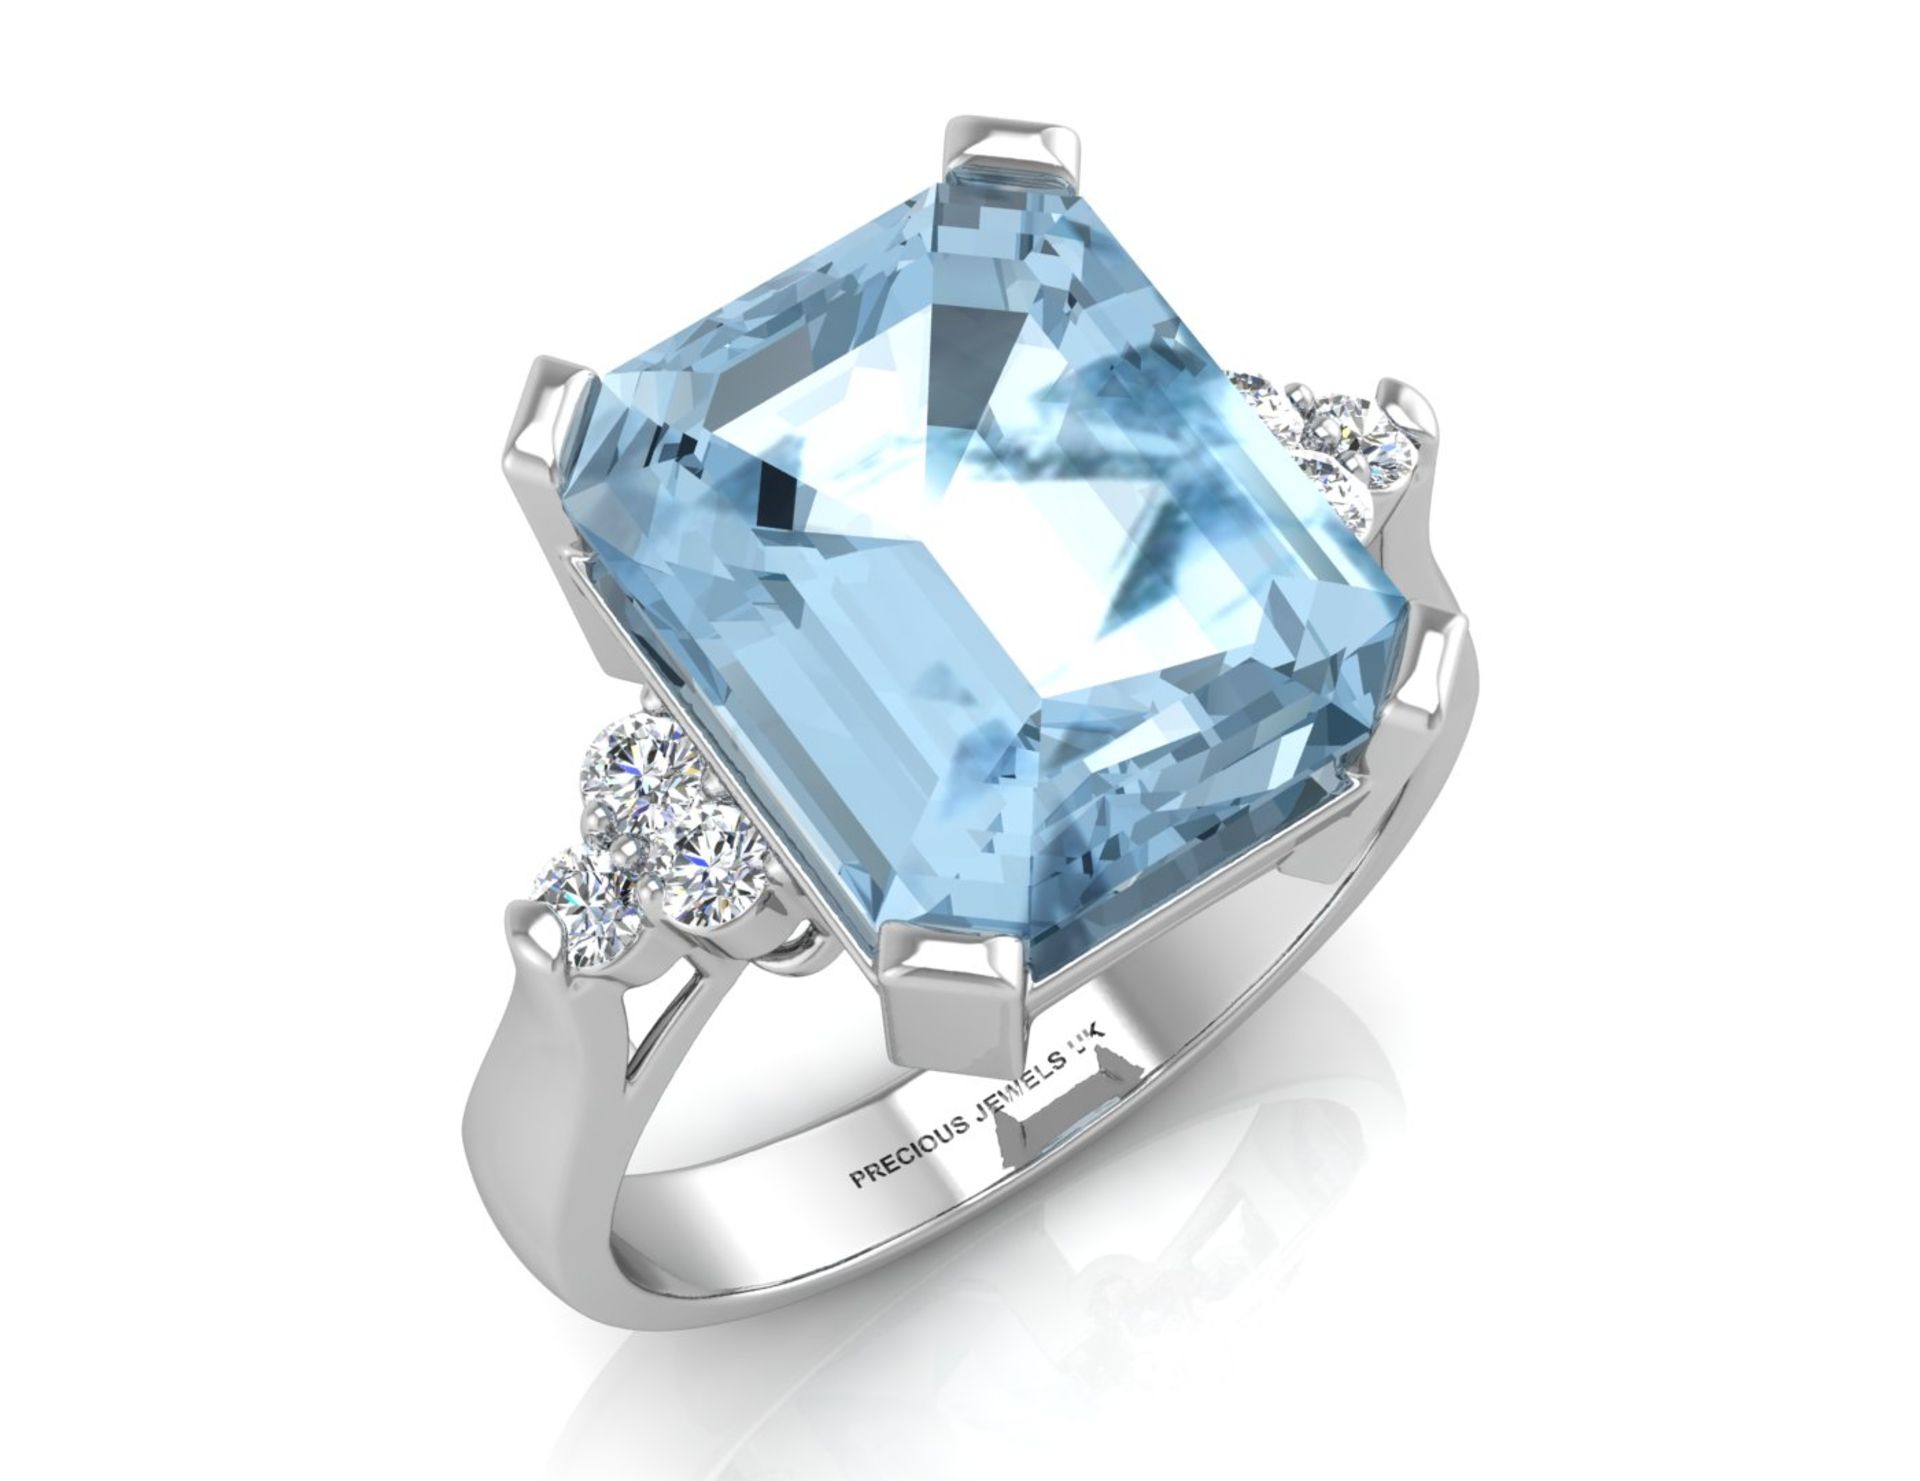 9ct White Gold Diamond And Blue Topaz Ring 0.18 Carats - Valued by AGI £1,645.00 - This stunning